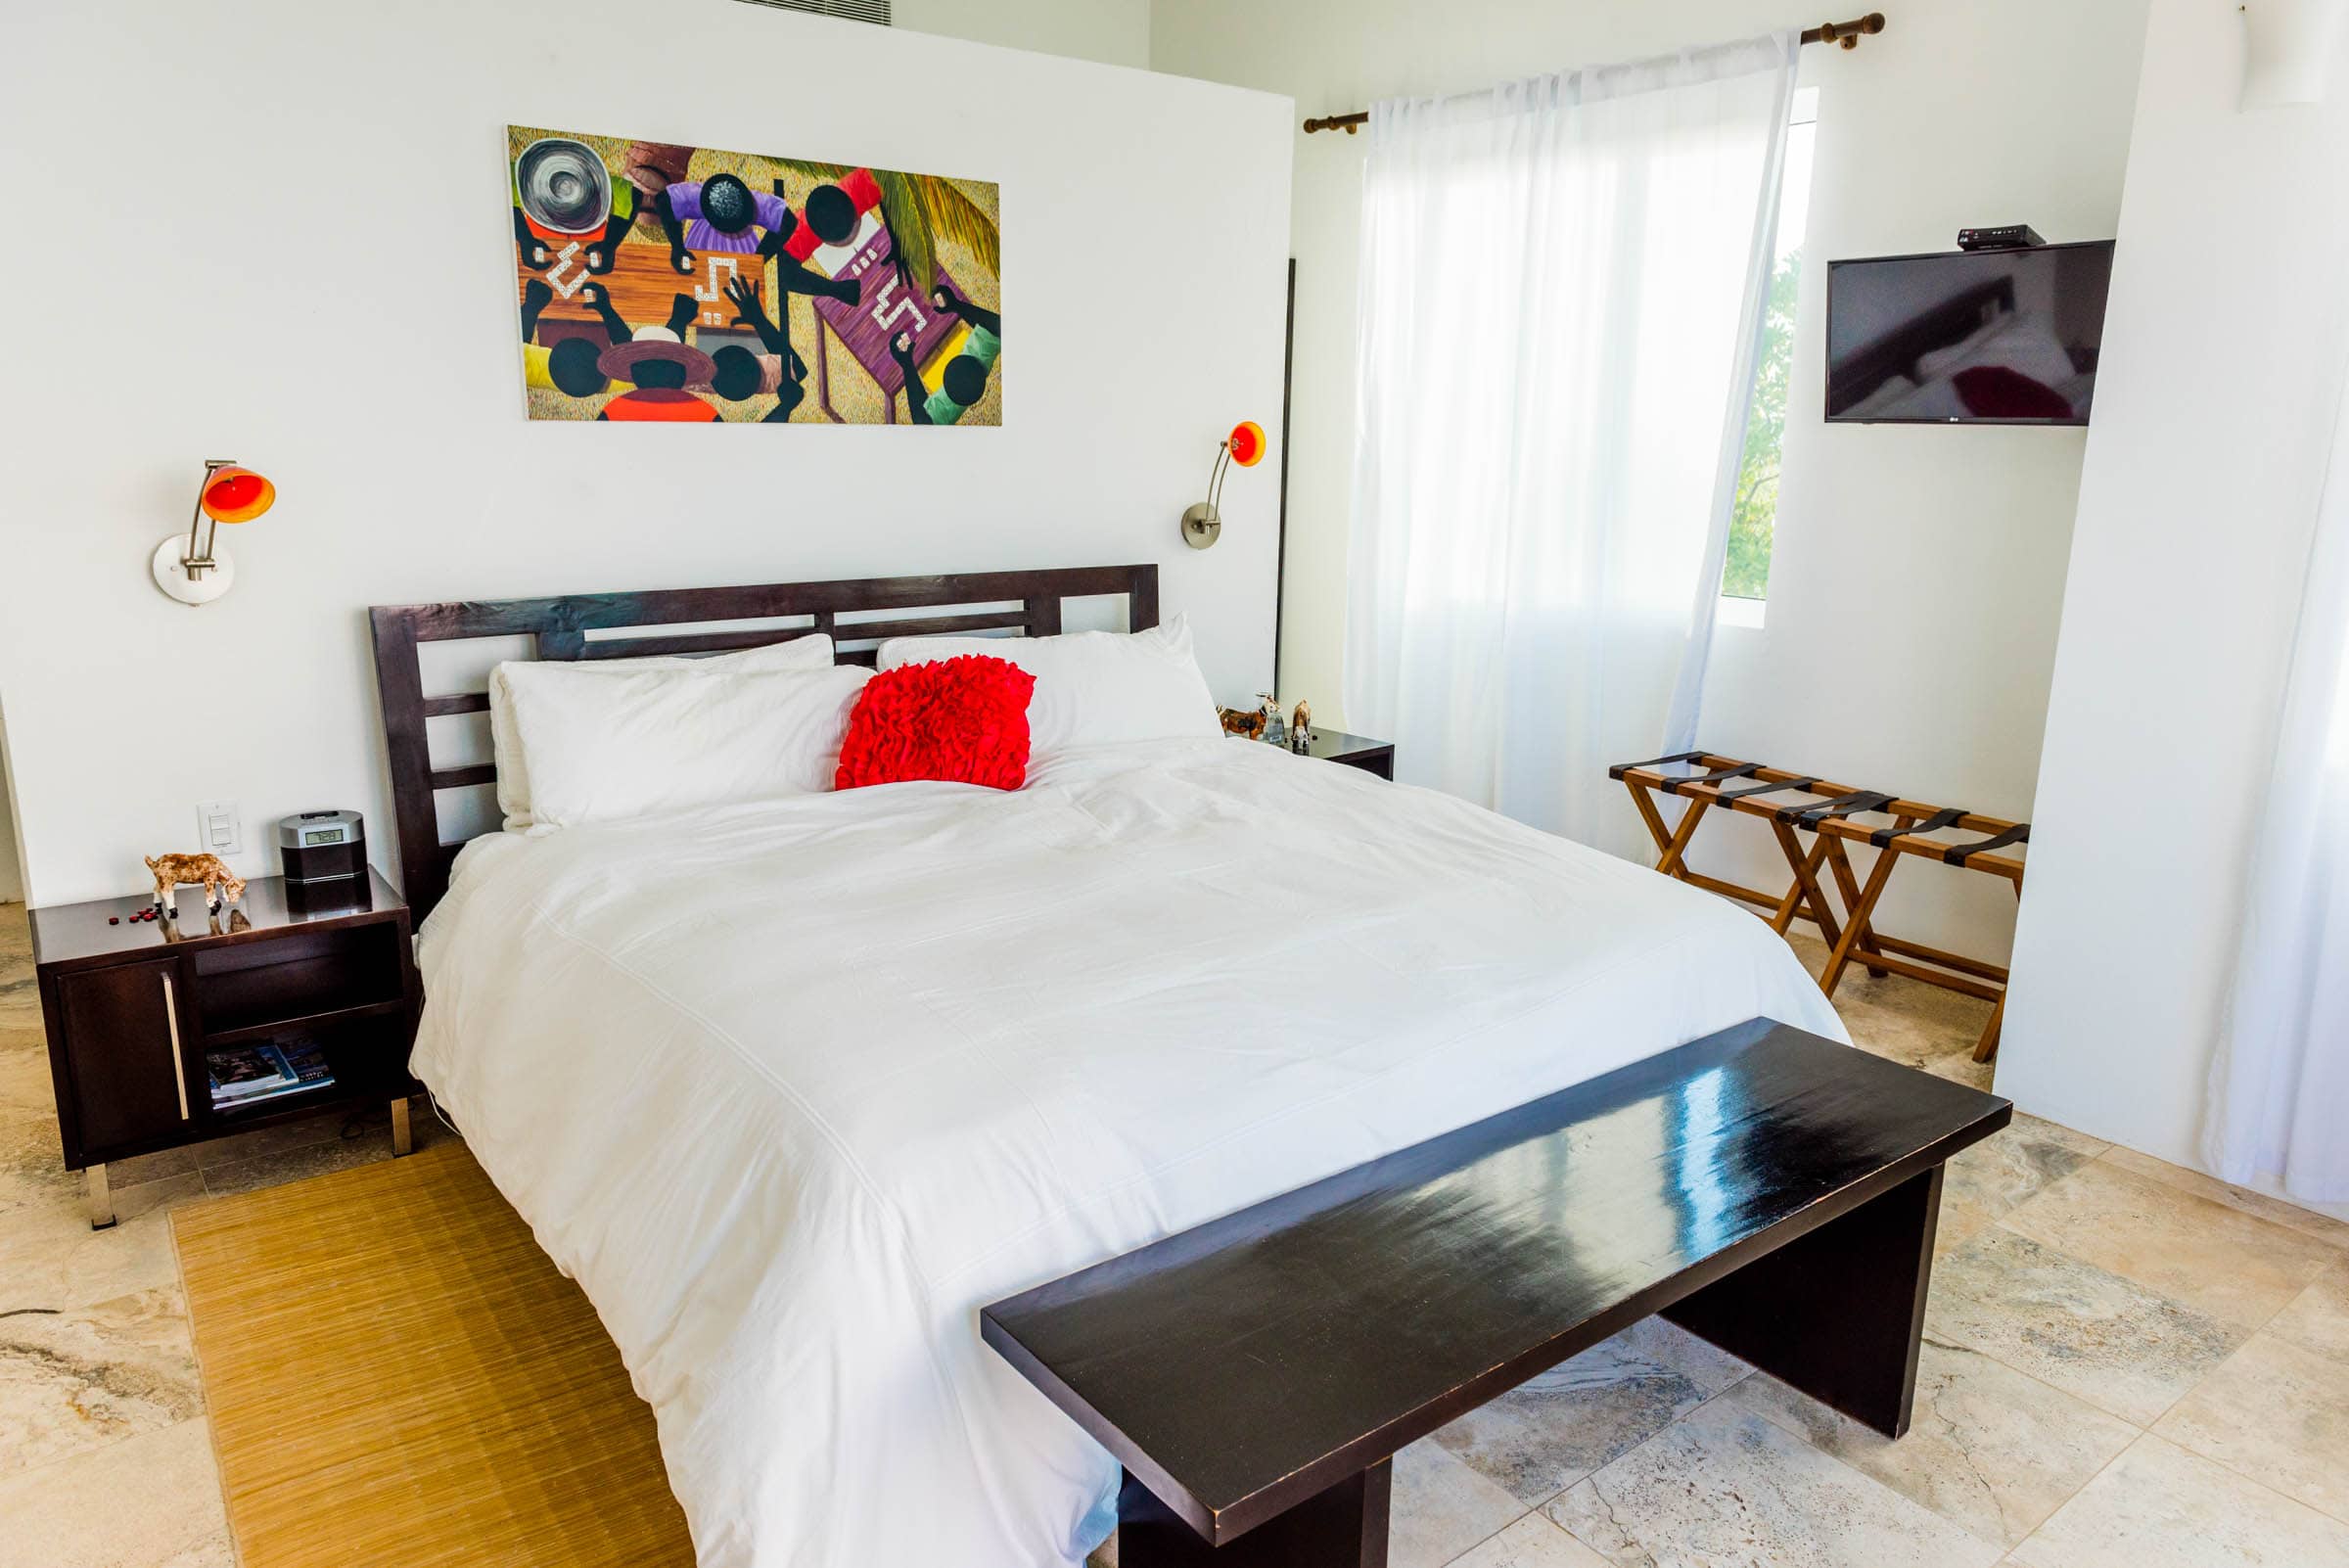 Each of the three bedrooms are bright, well-appointed, and feature views of St. Martin.